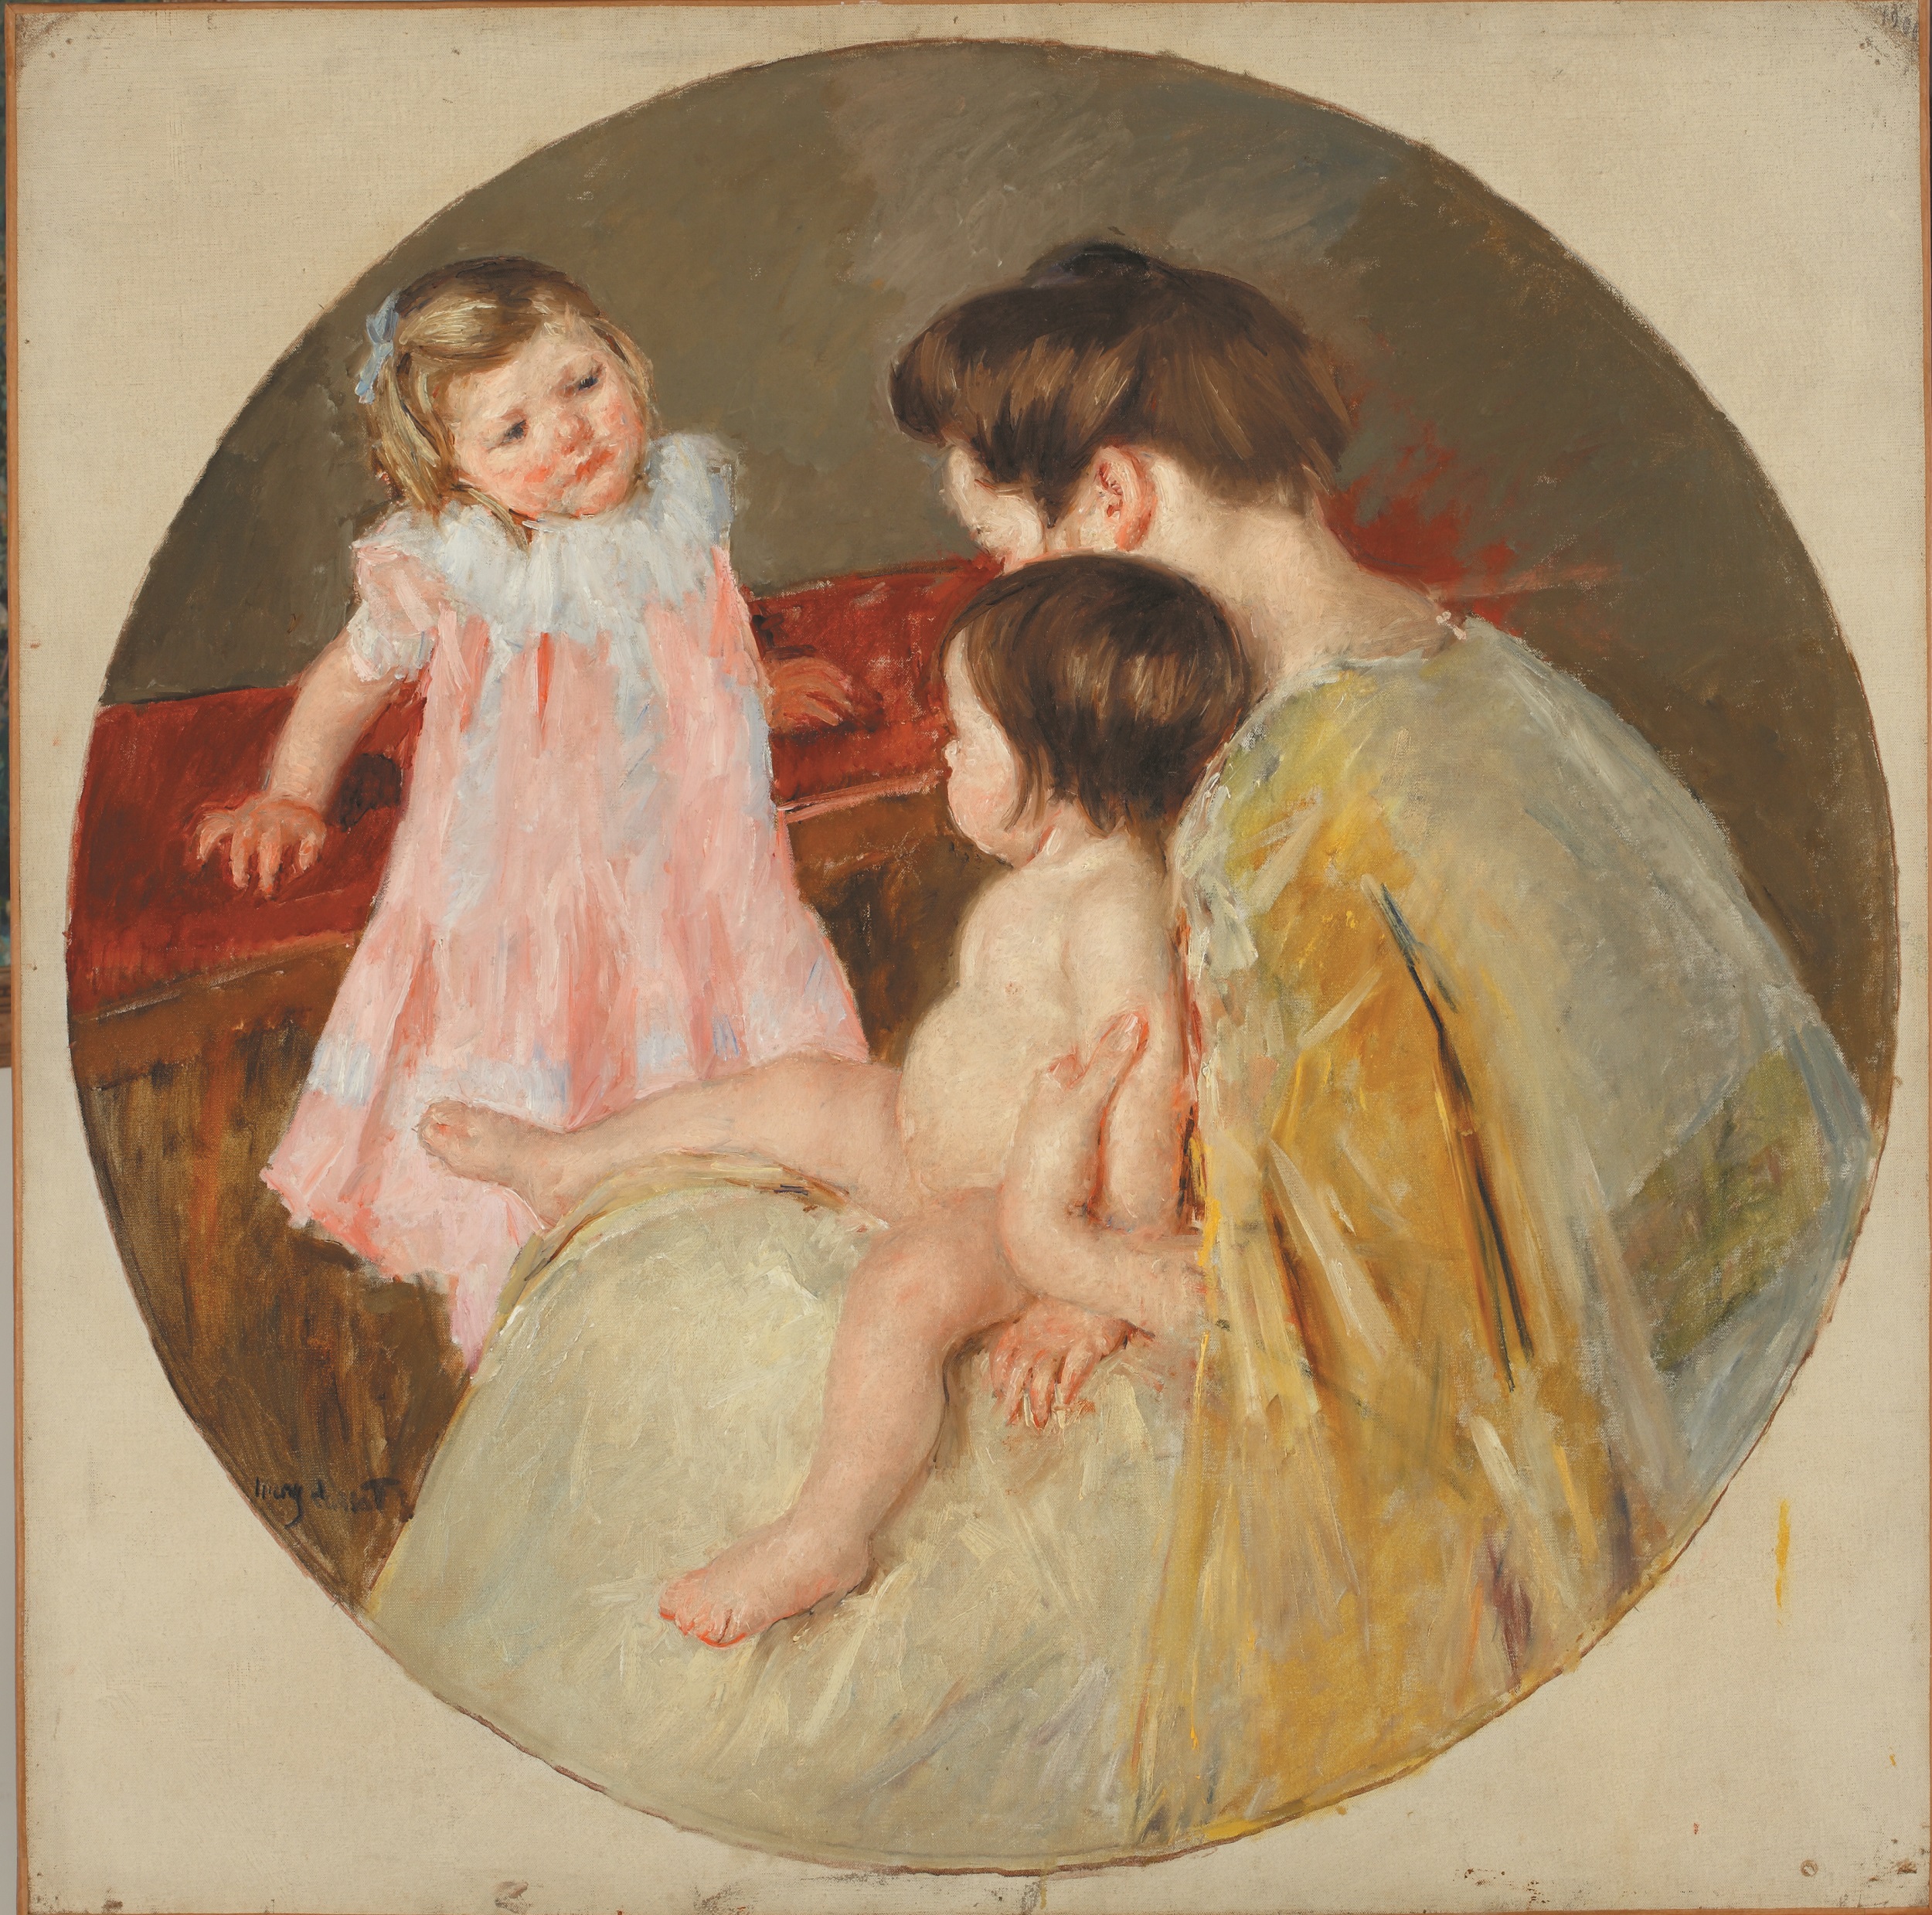 Round painting of a nude child seated on the lap of a woman in a nightgown, with a young girl in a pink dress looking on